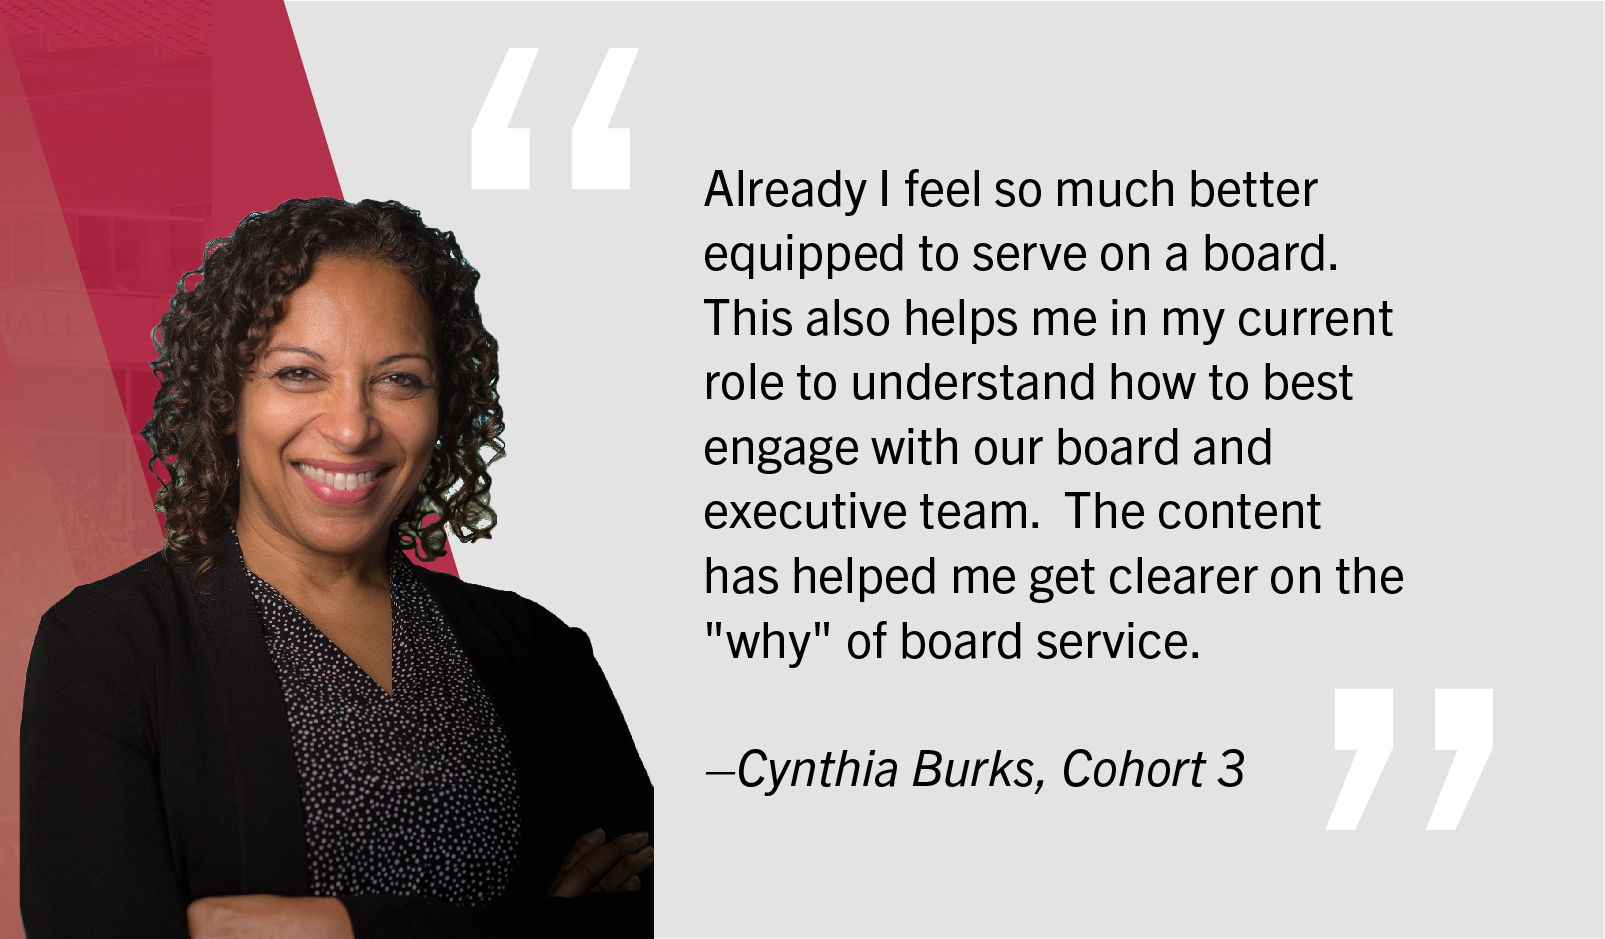 Quote by Cynthia Burks, Cohort 3